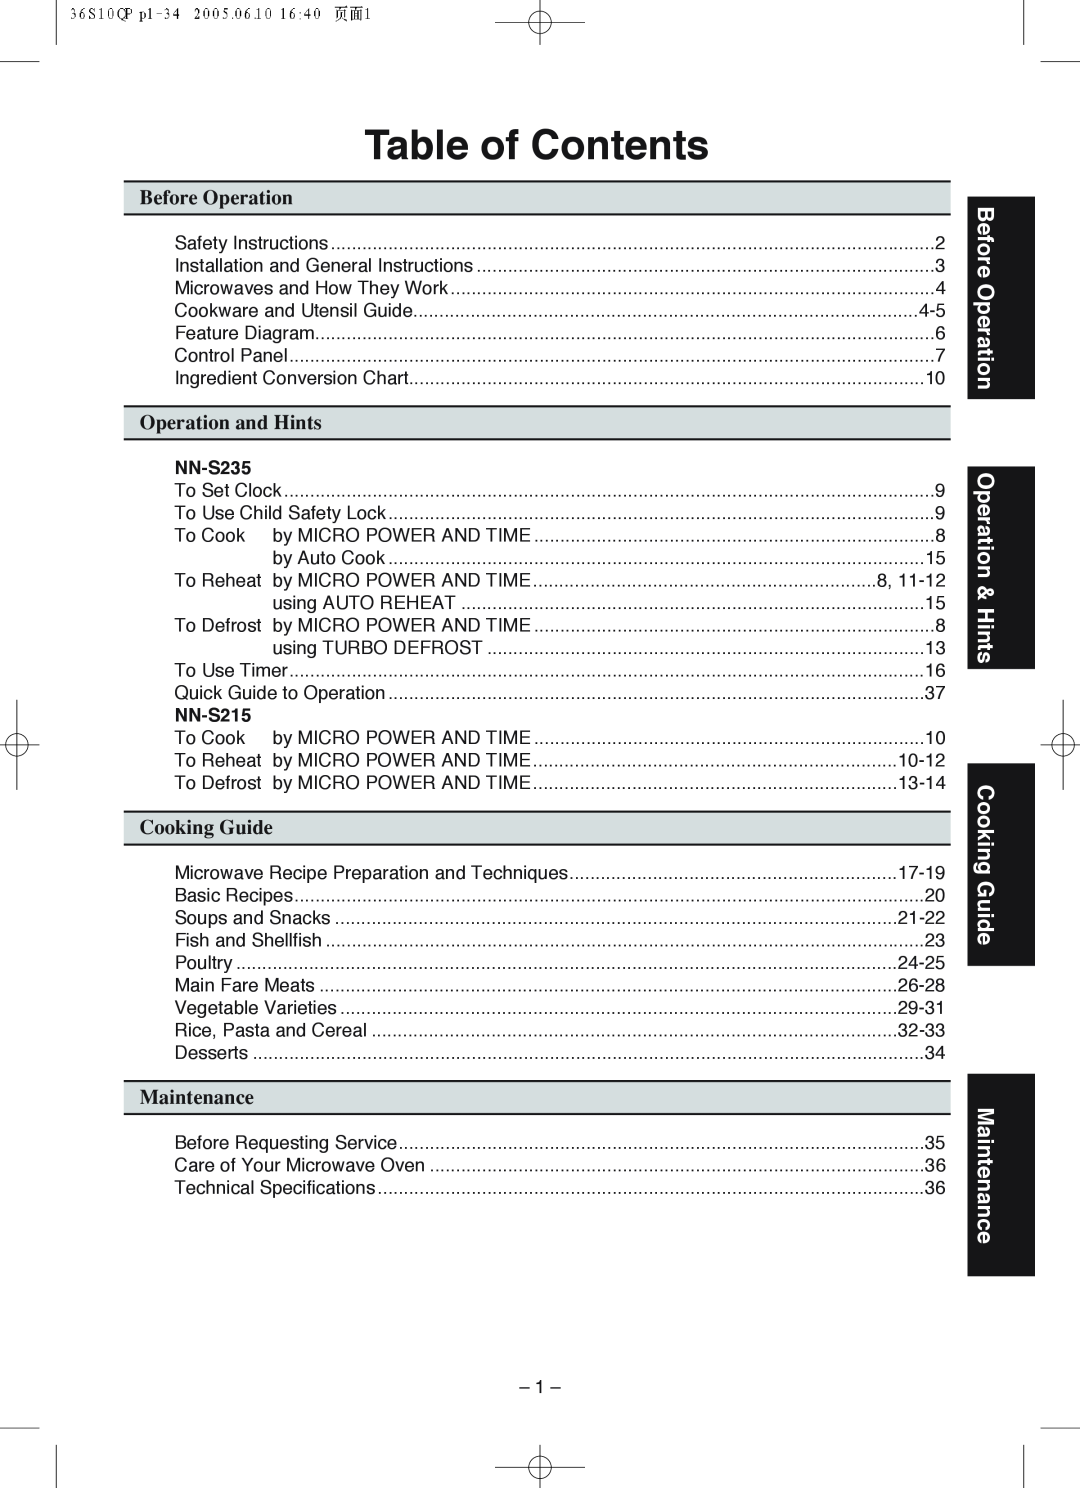 Panasonic NN-S235 manual Table of Contents, Before Operation Operation & Hints Cooking Guide Maintenance, NN-S215 